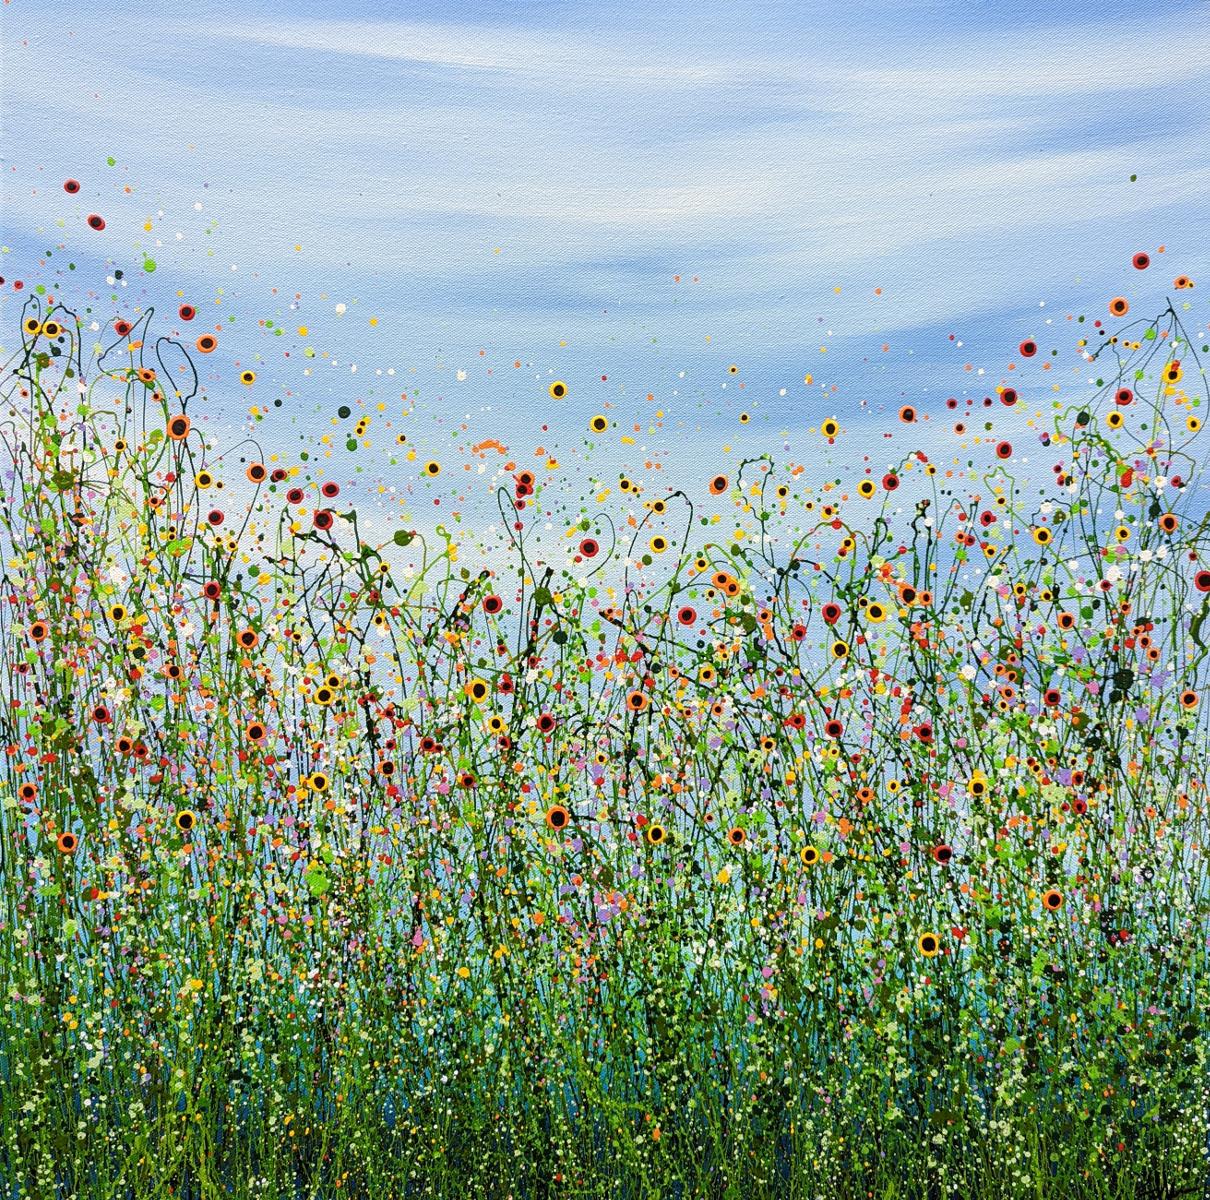 Figurative Painting Lucy Moore  - Peuplier Morning Poppy Meadows n° 18 de Lucy Moore, art original, abstrait, floral 